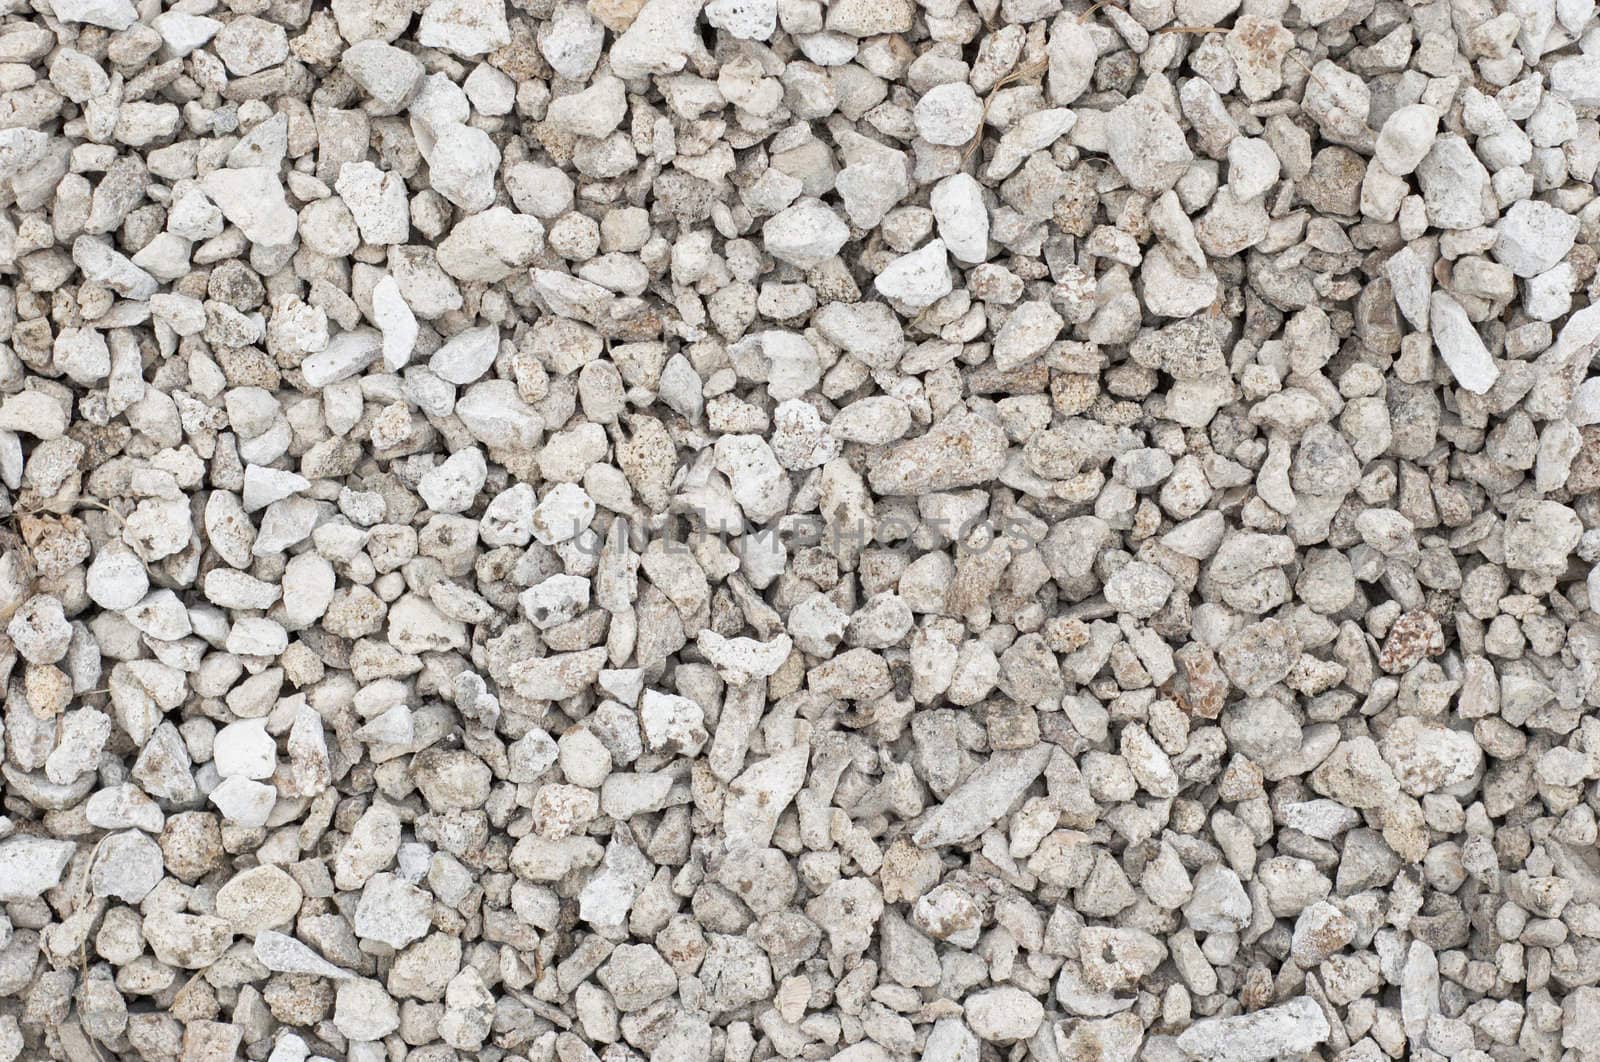 small crushed stones (road metal) material. textured background.